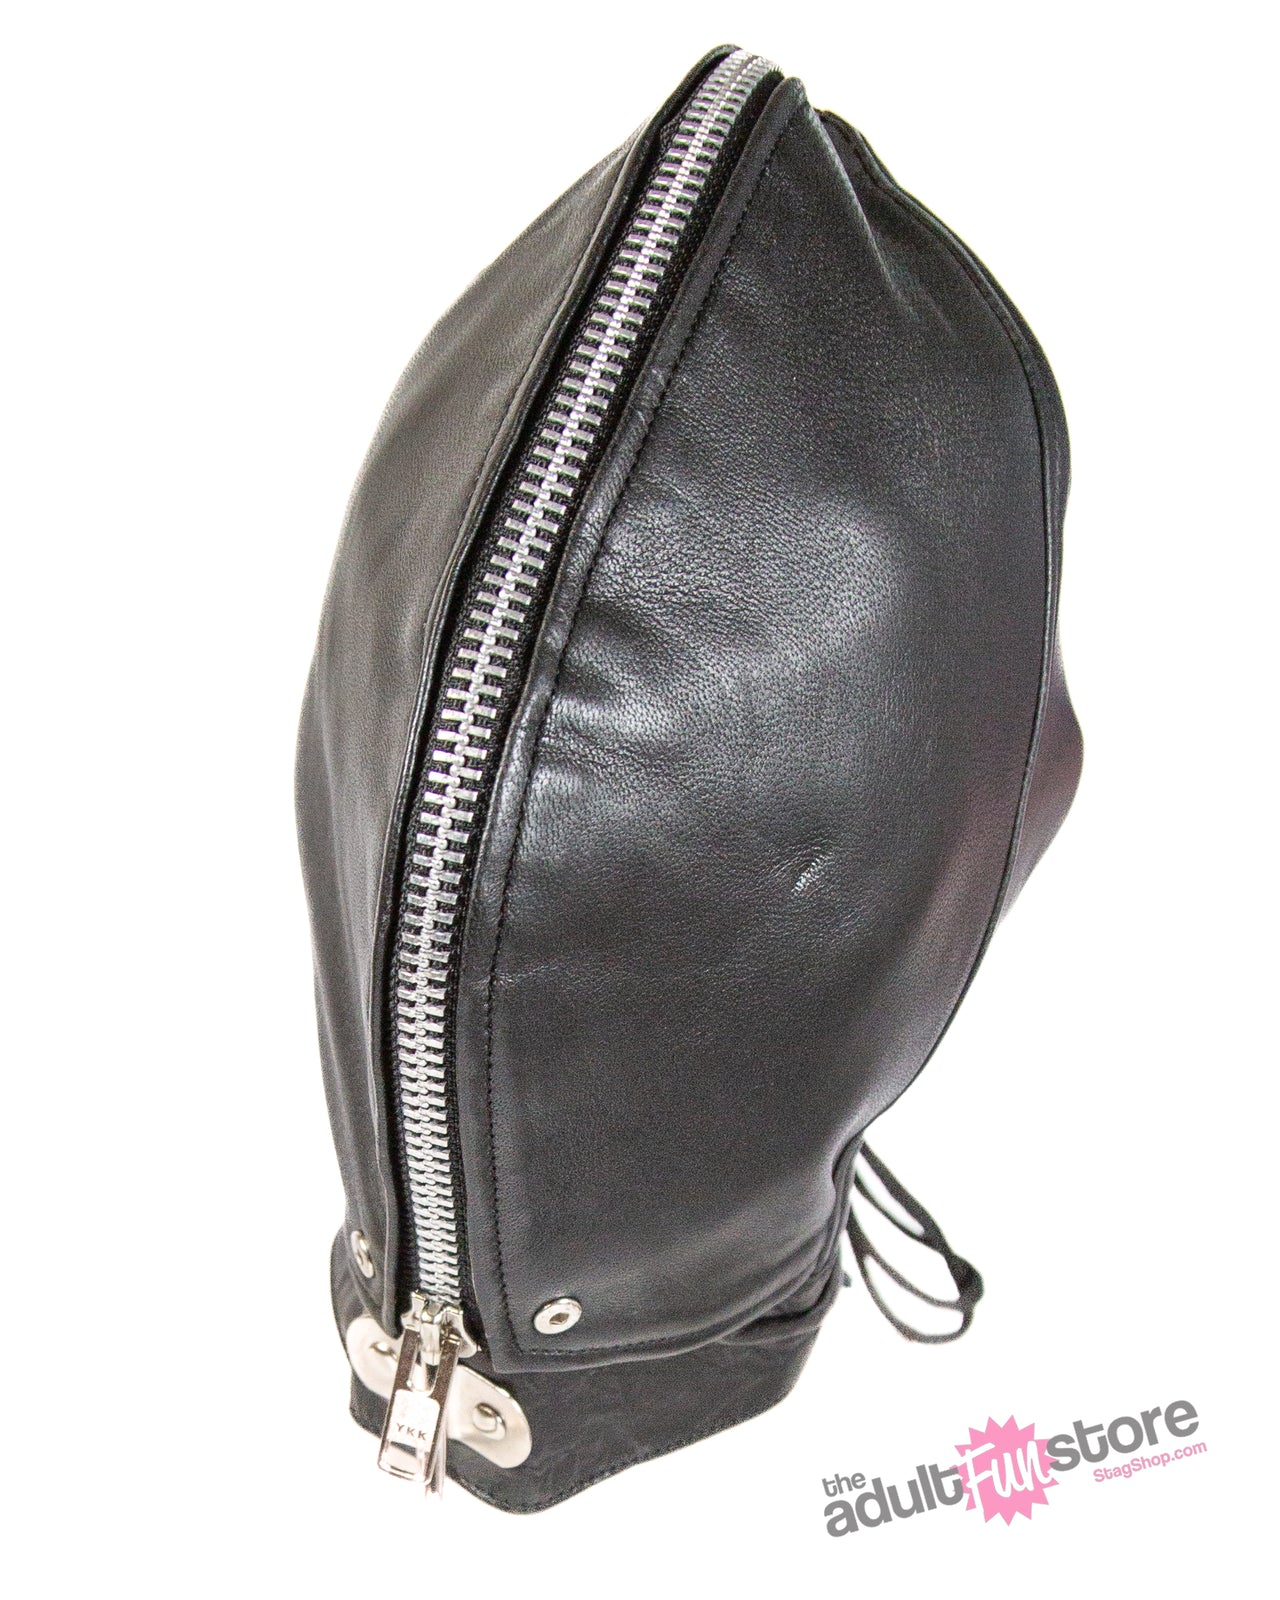 Rouge Garments - Leather Fly Trap Mask - Black - Stag Shop